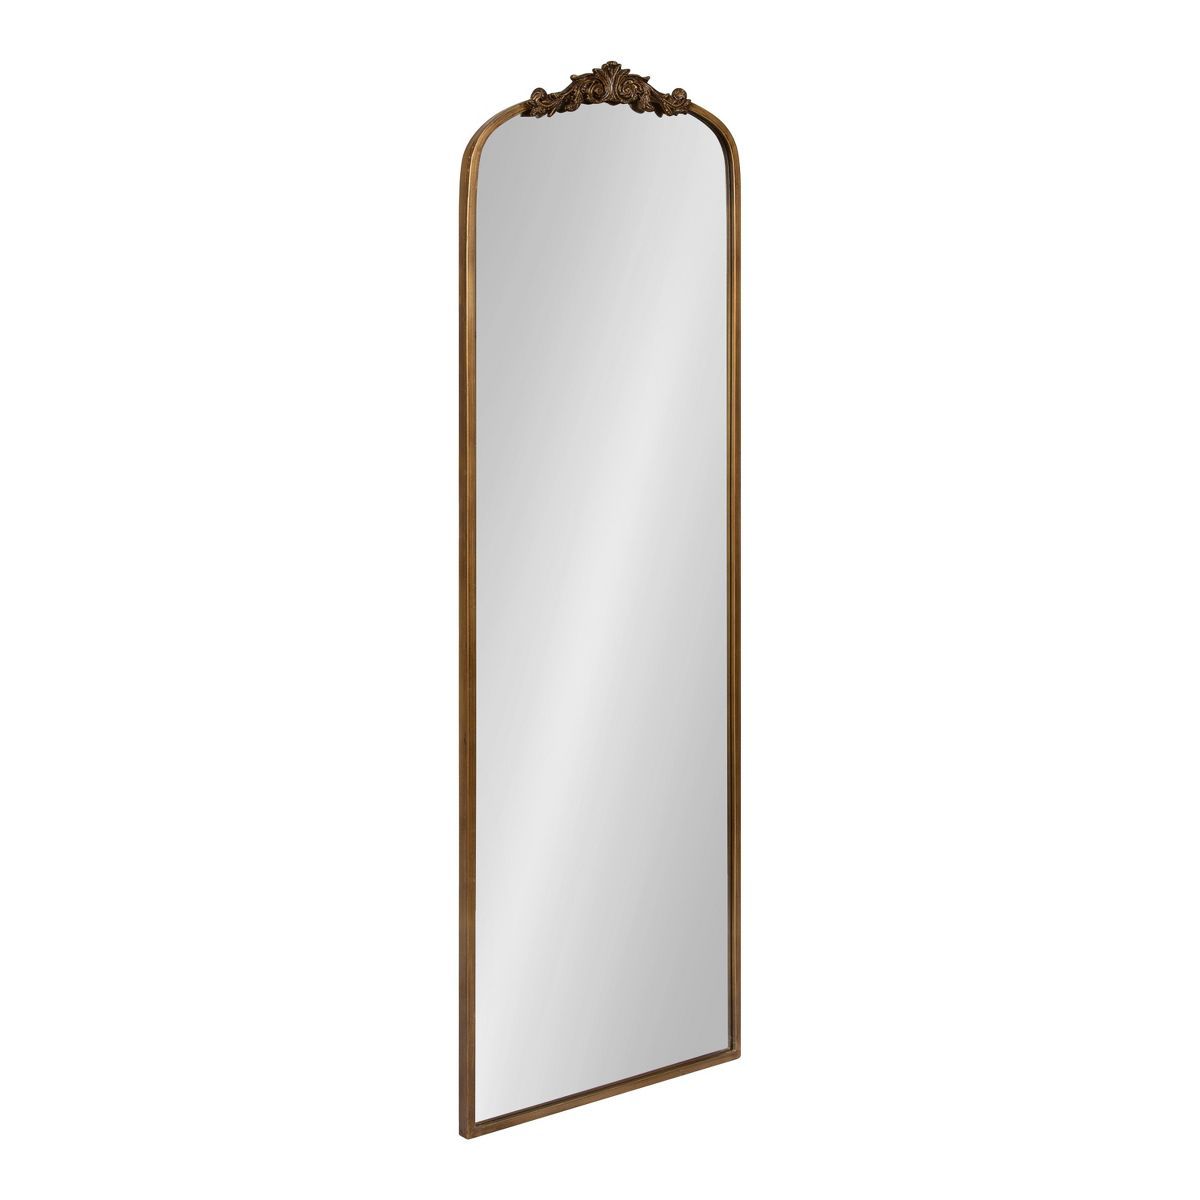 Kate and Laurel - Arendahl Traditional Arch Mirror | Target